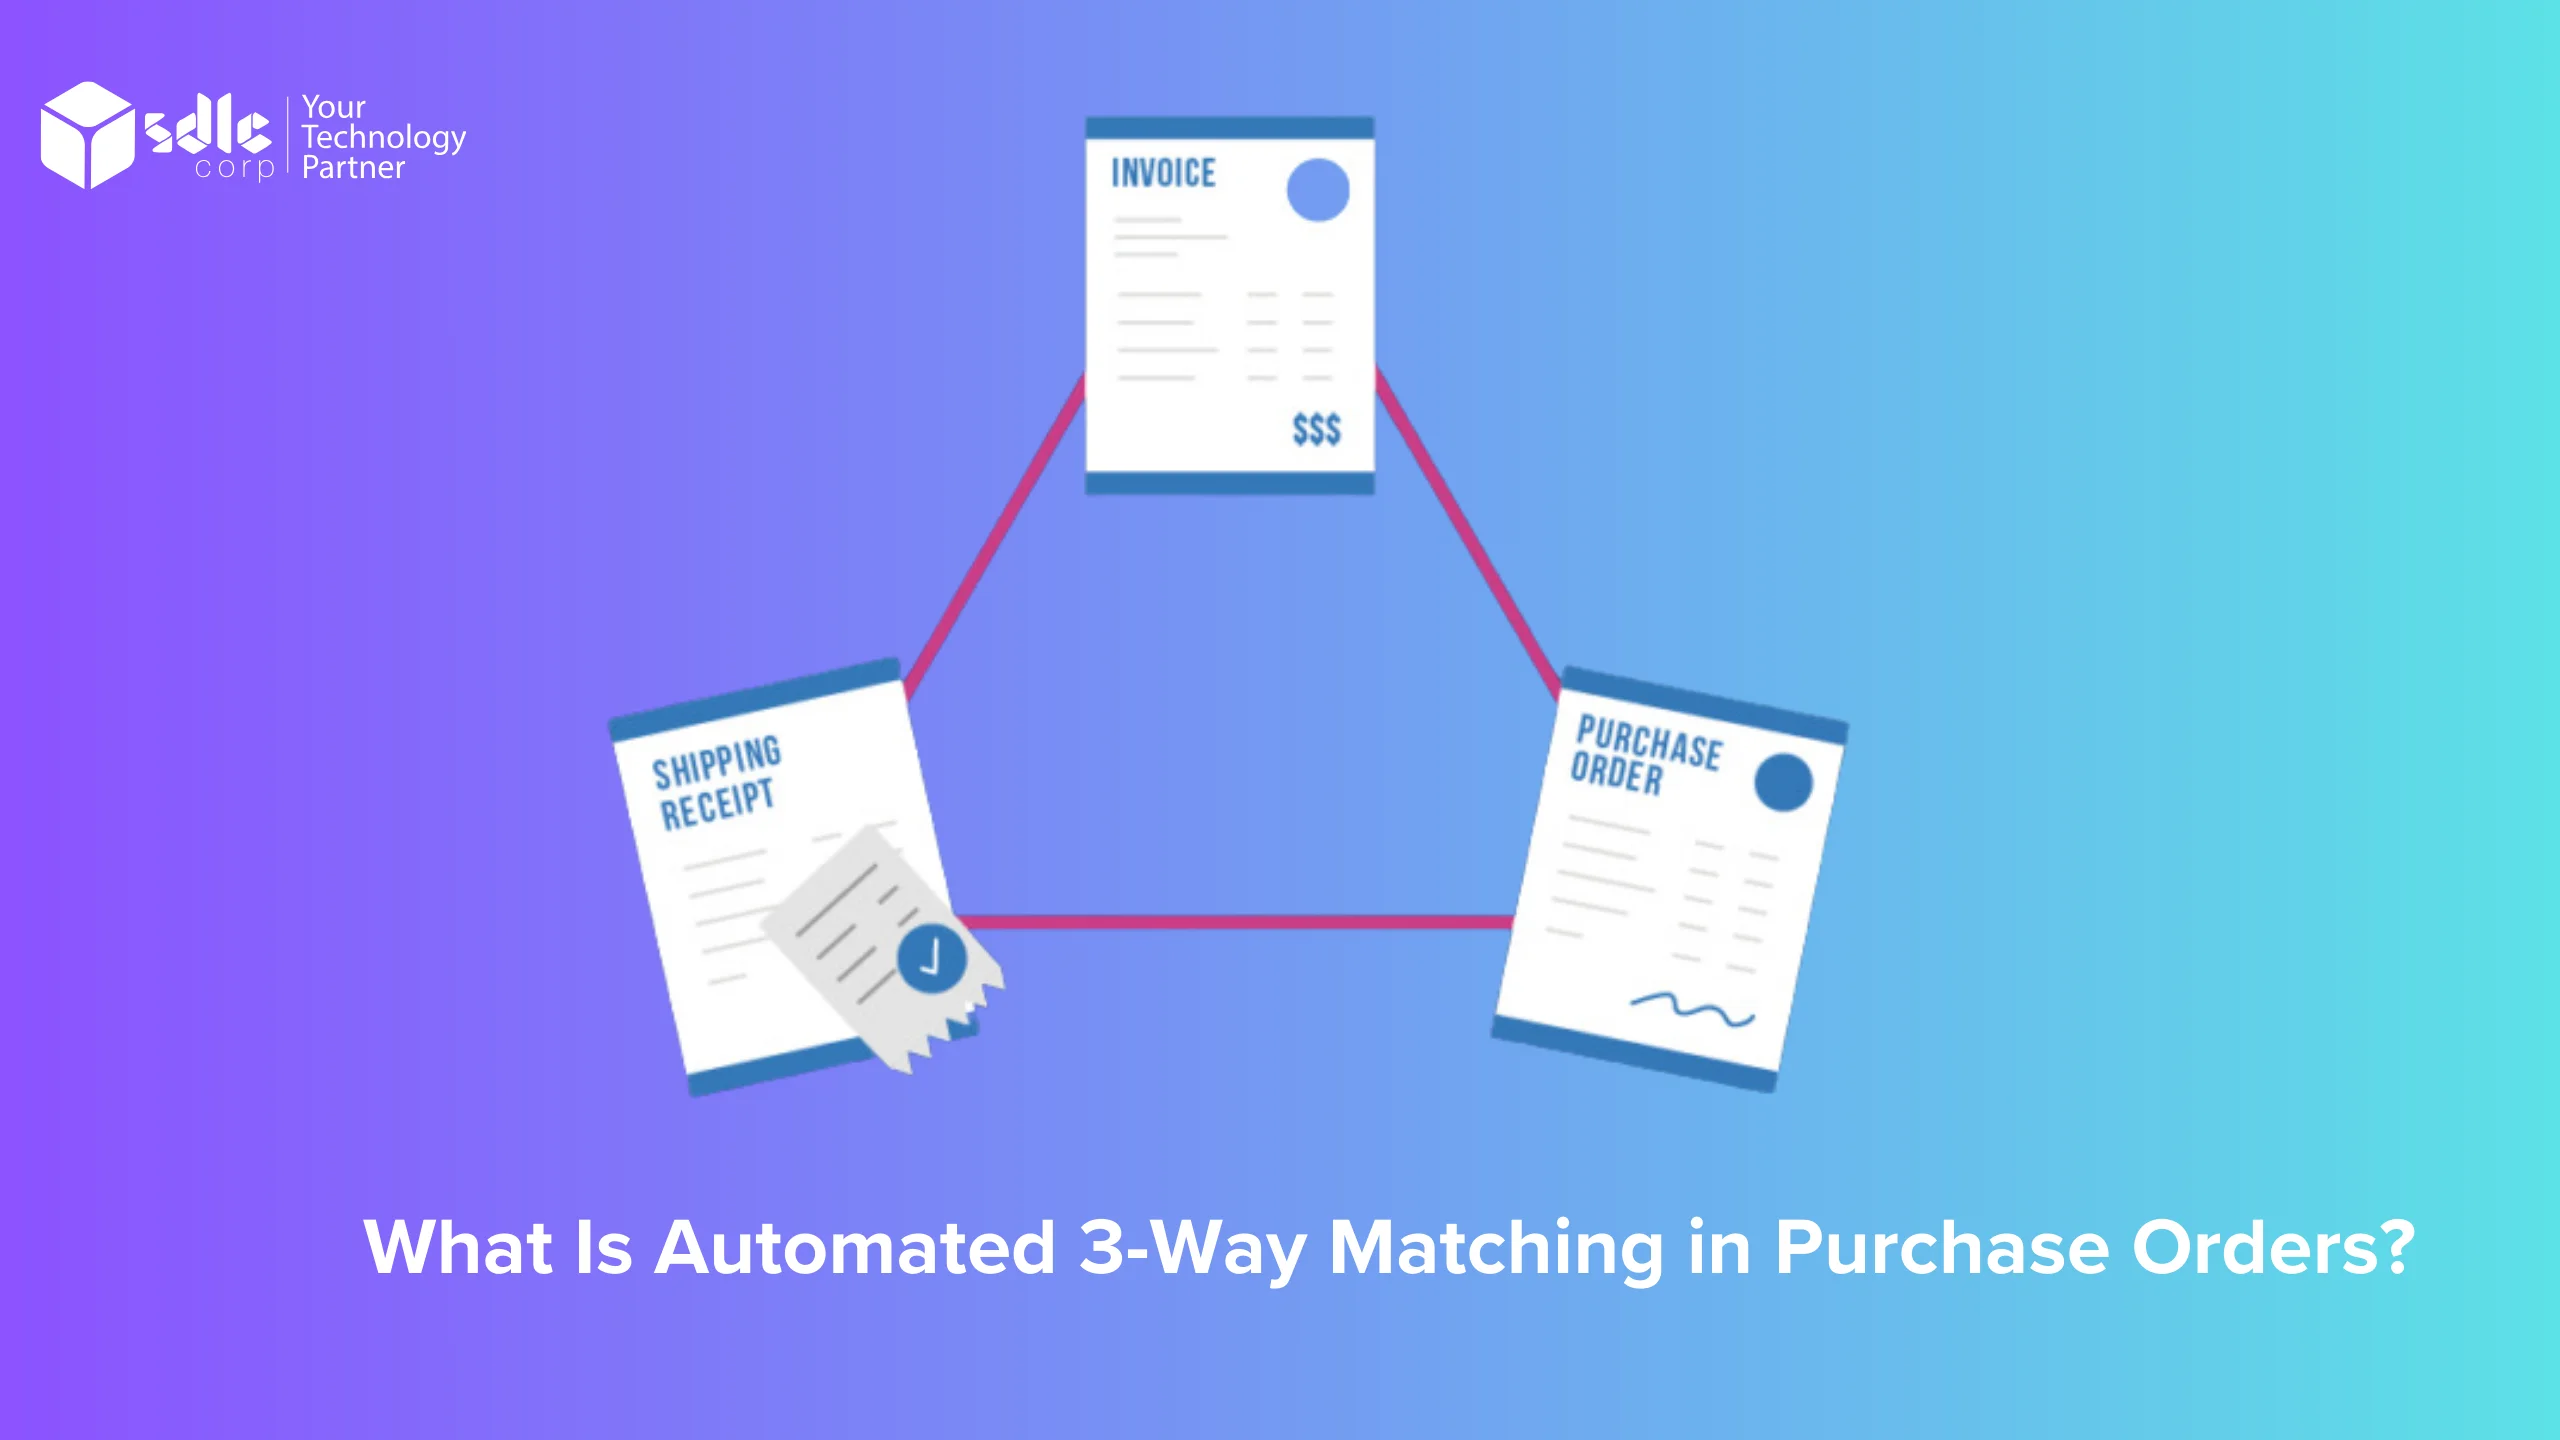 What Is Automated 3-Way Matching in Purchase Orders